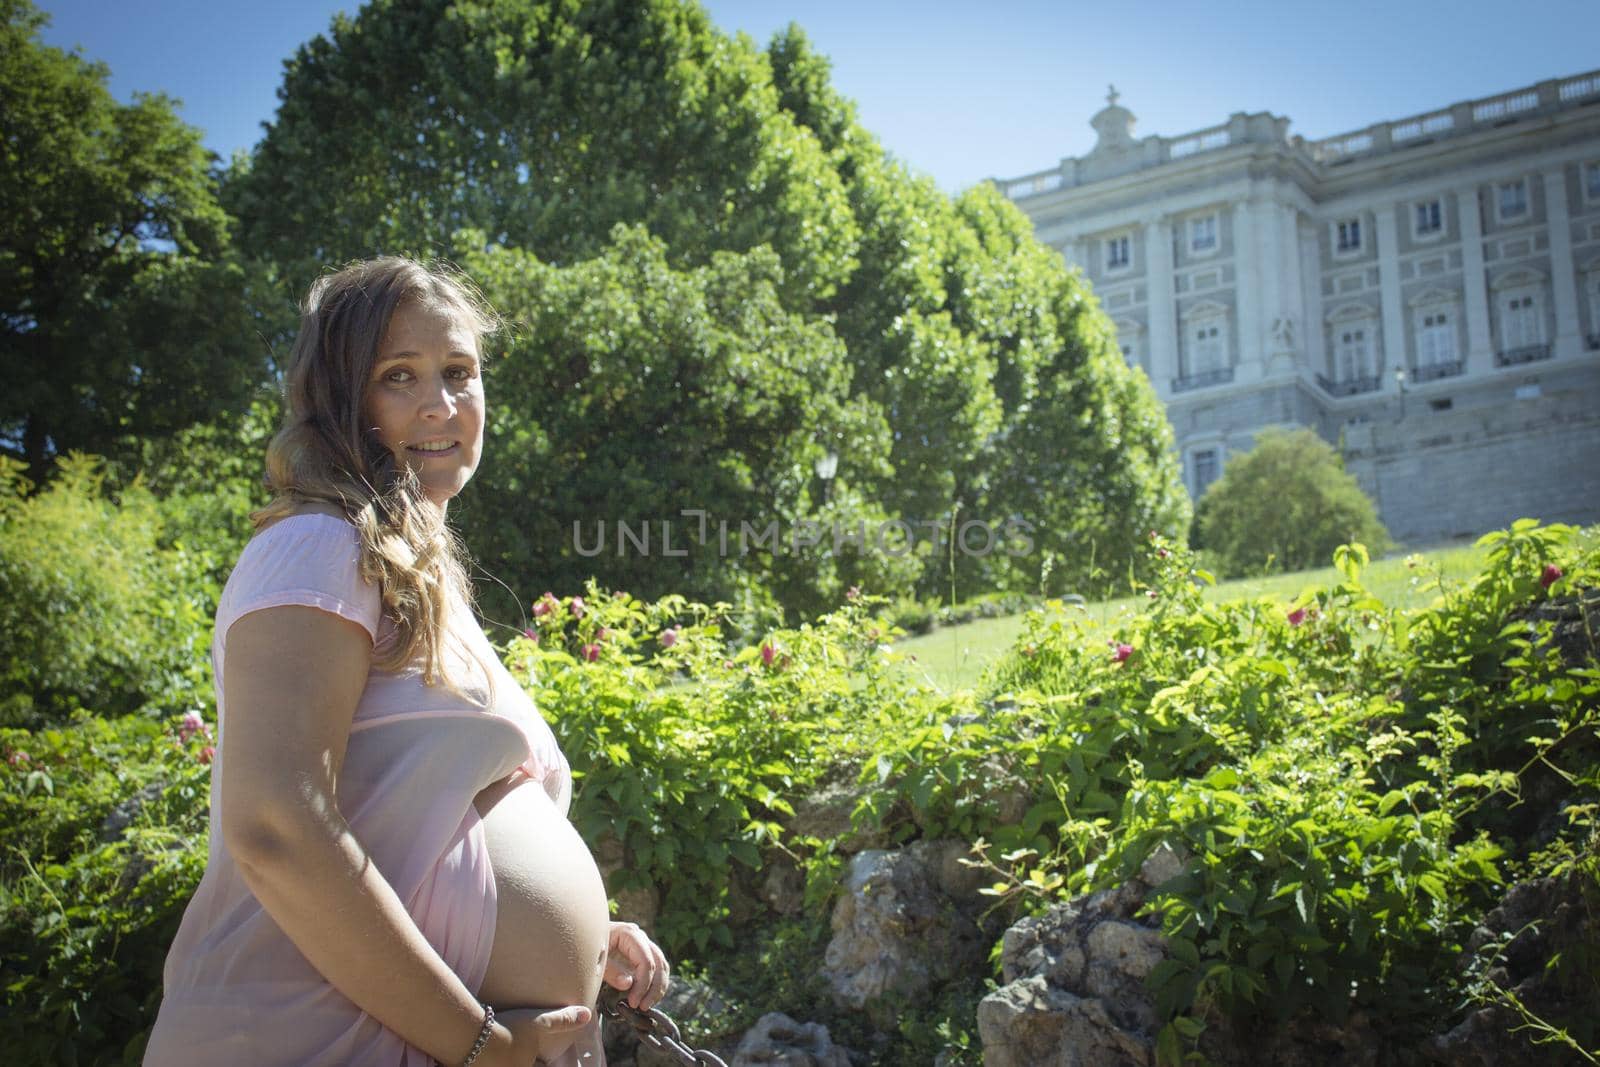 Pregnant woman with pink dress in a park. Sunny day